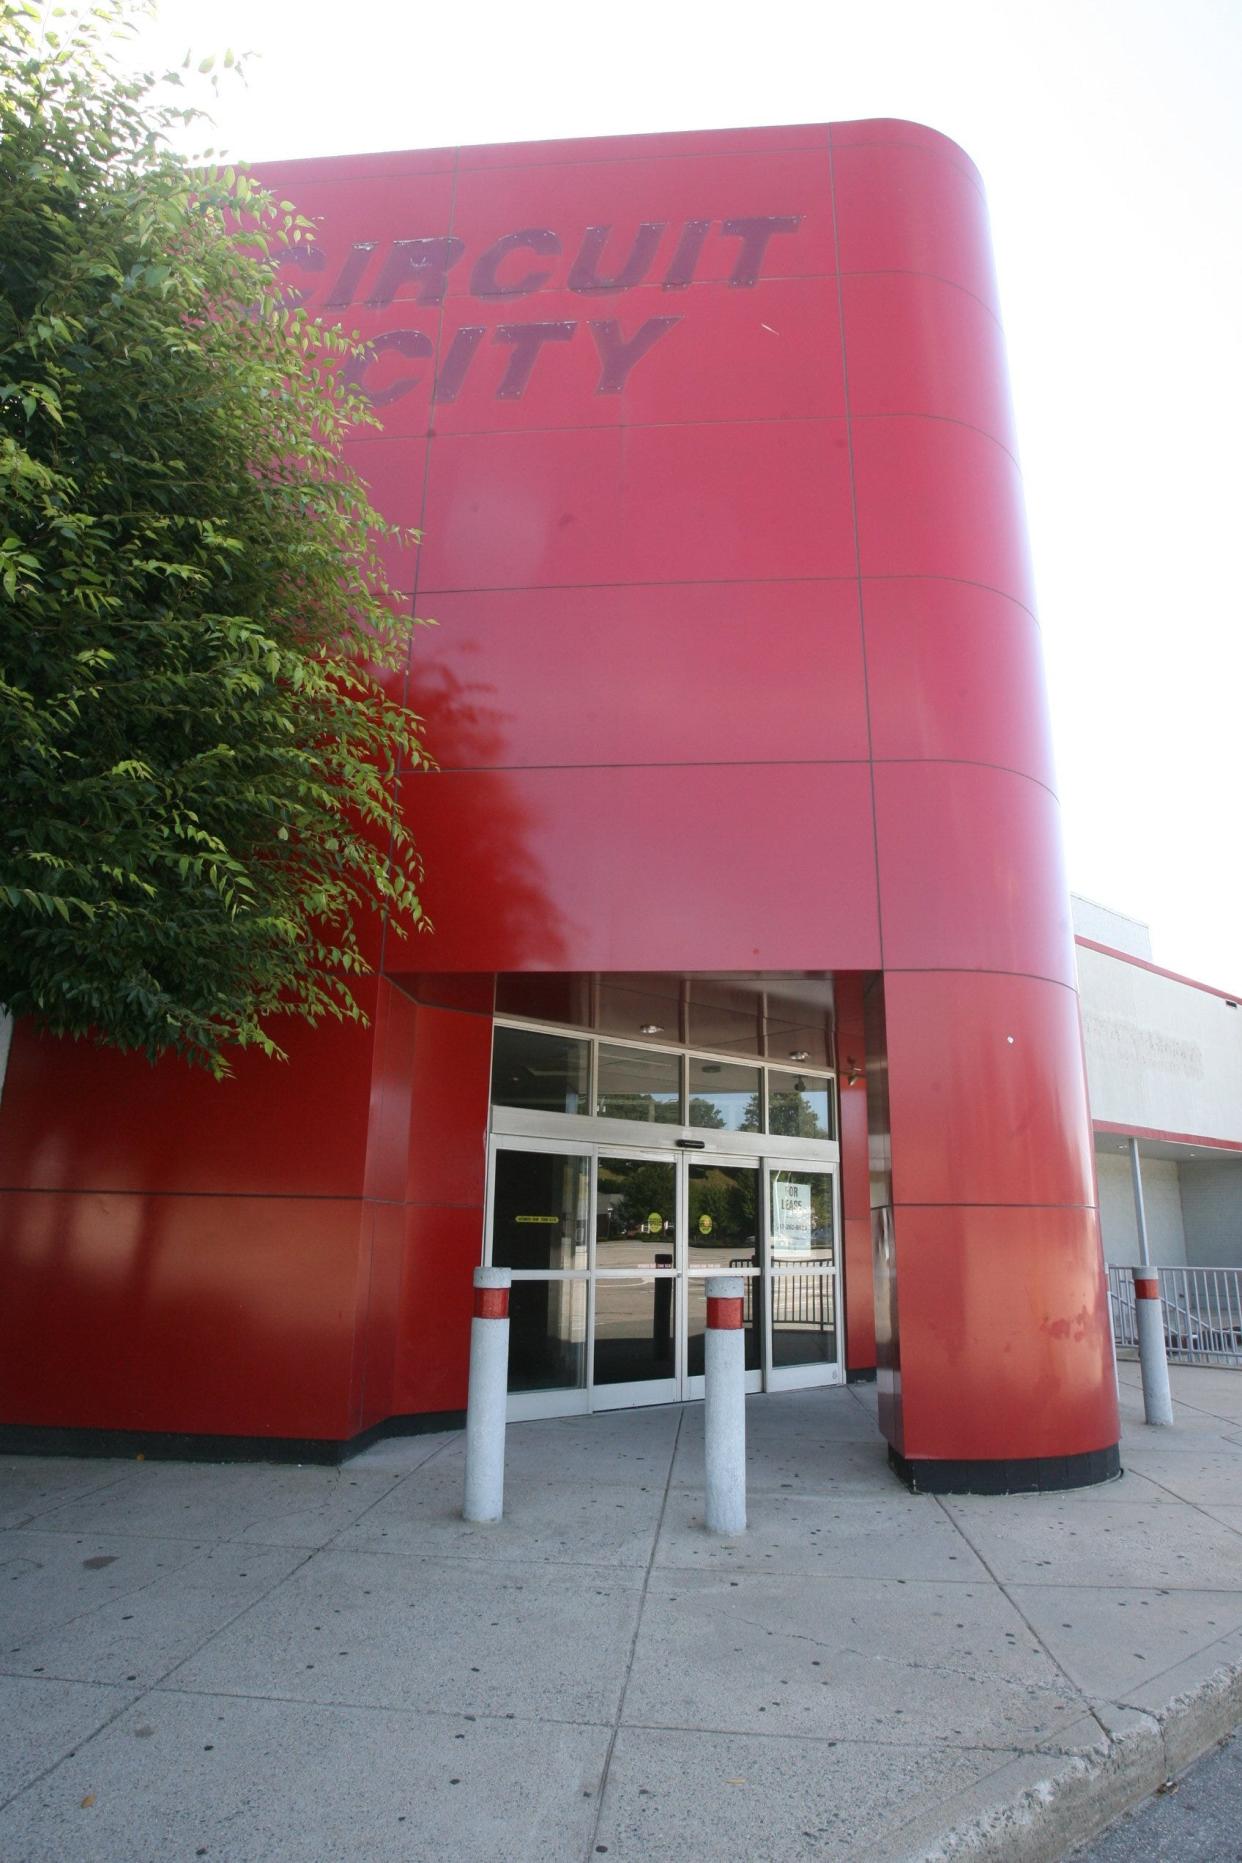 The former Circuit City storefront, located in the southern portion of Garden City, that went out of business months ago, is still empty.